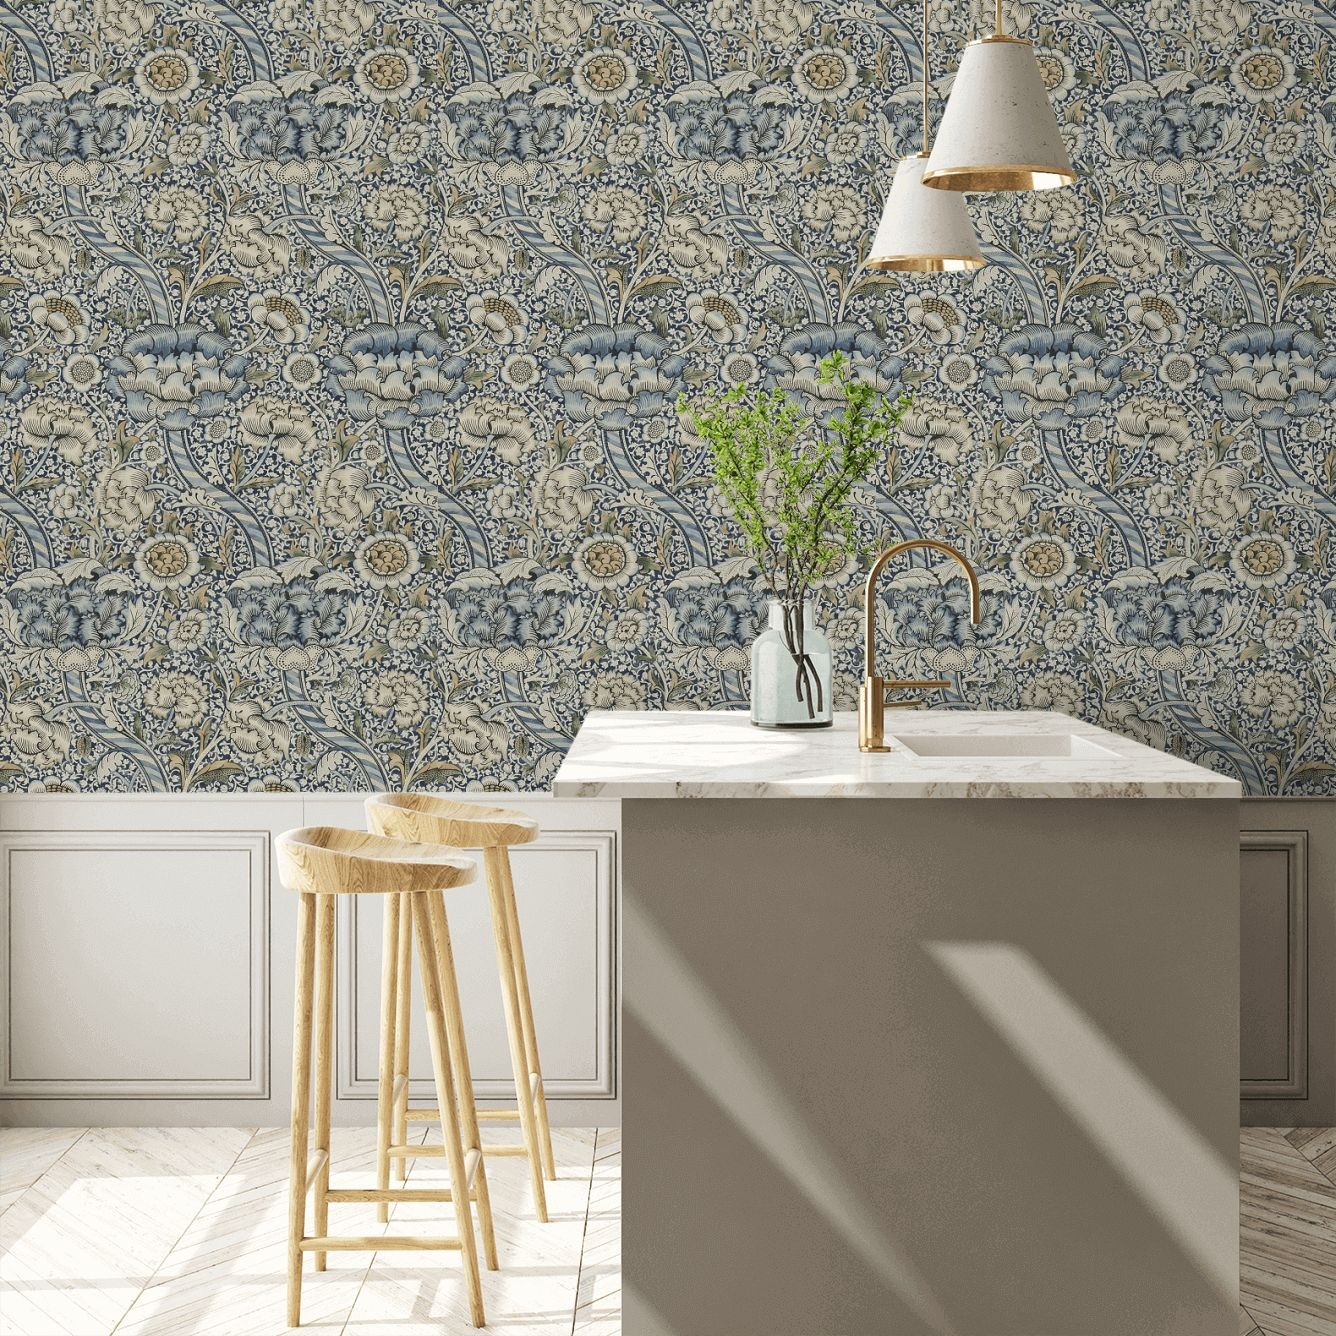 Wandle Wallpaper - Blue/Stone - By Morris and Co - 216422